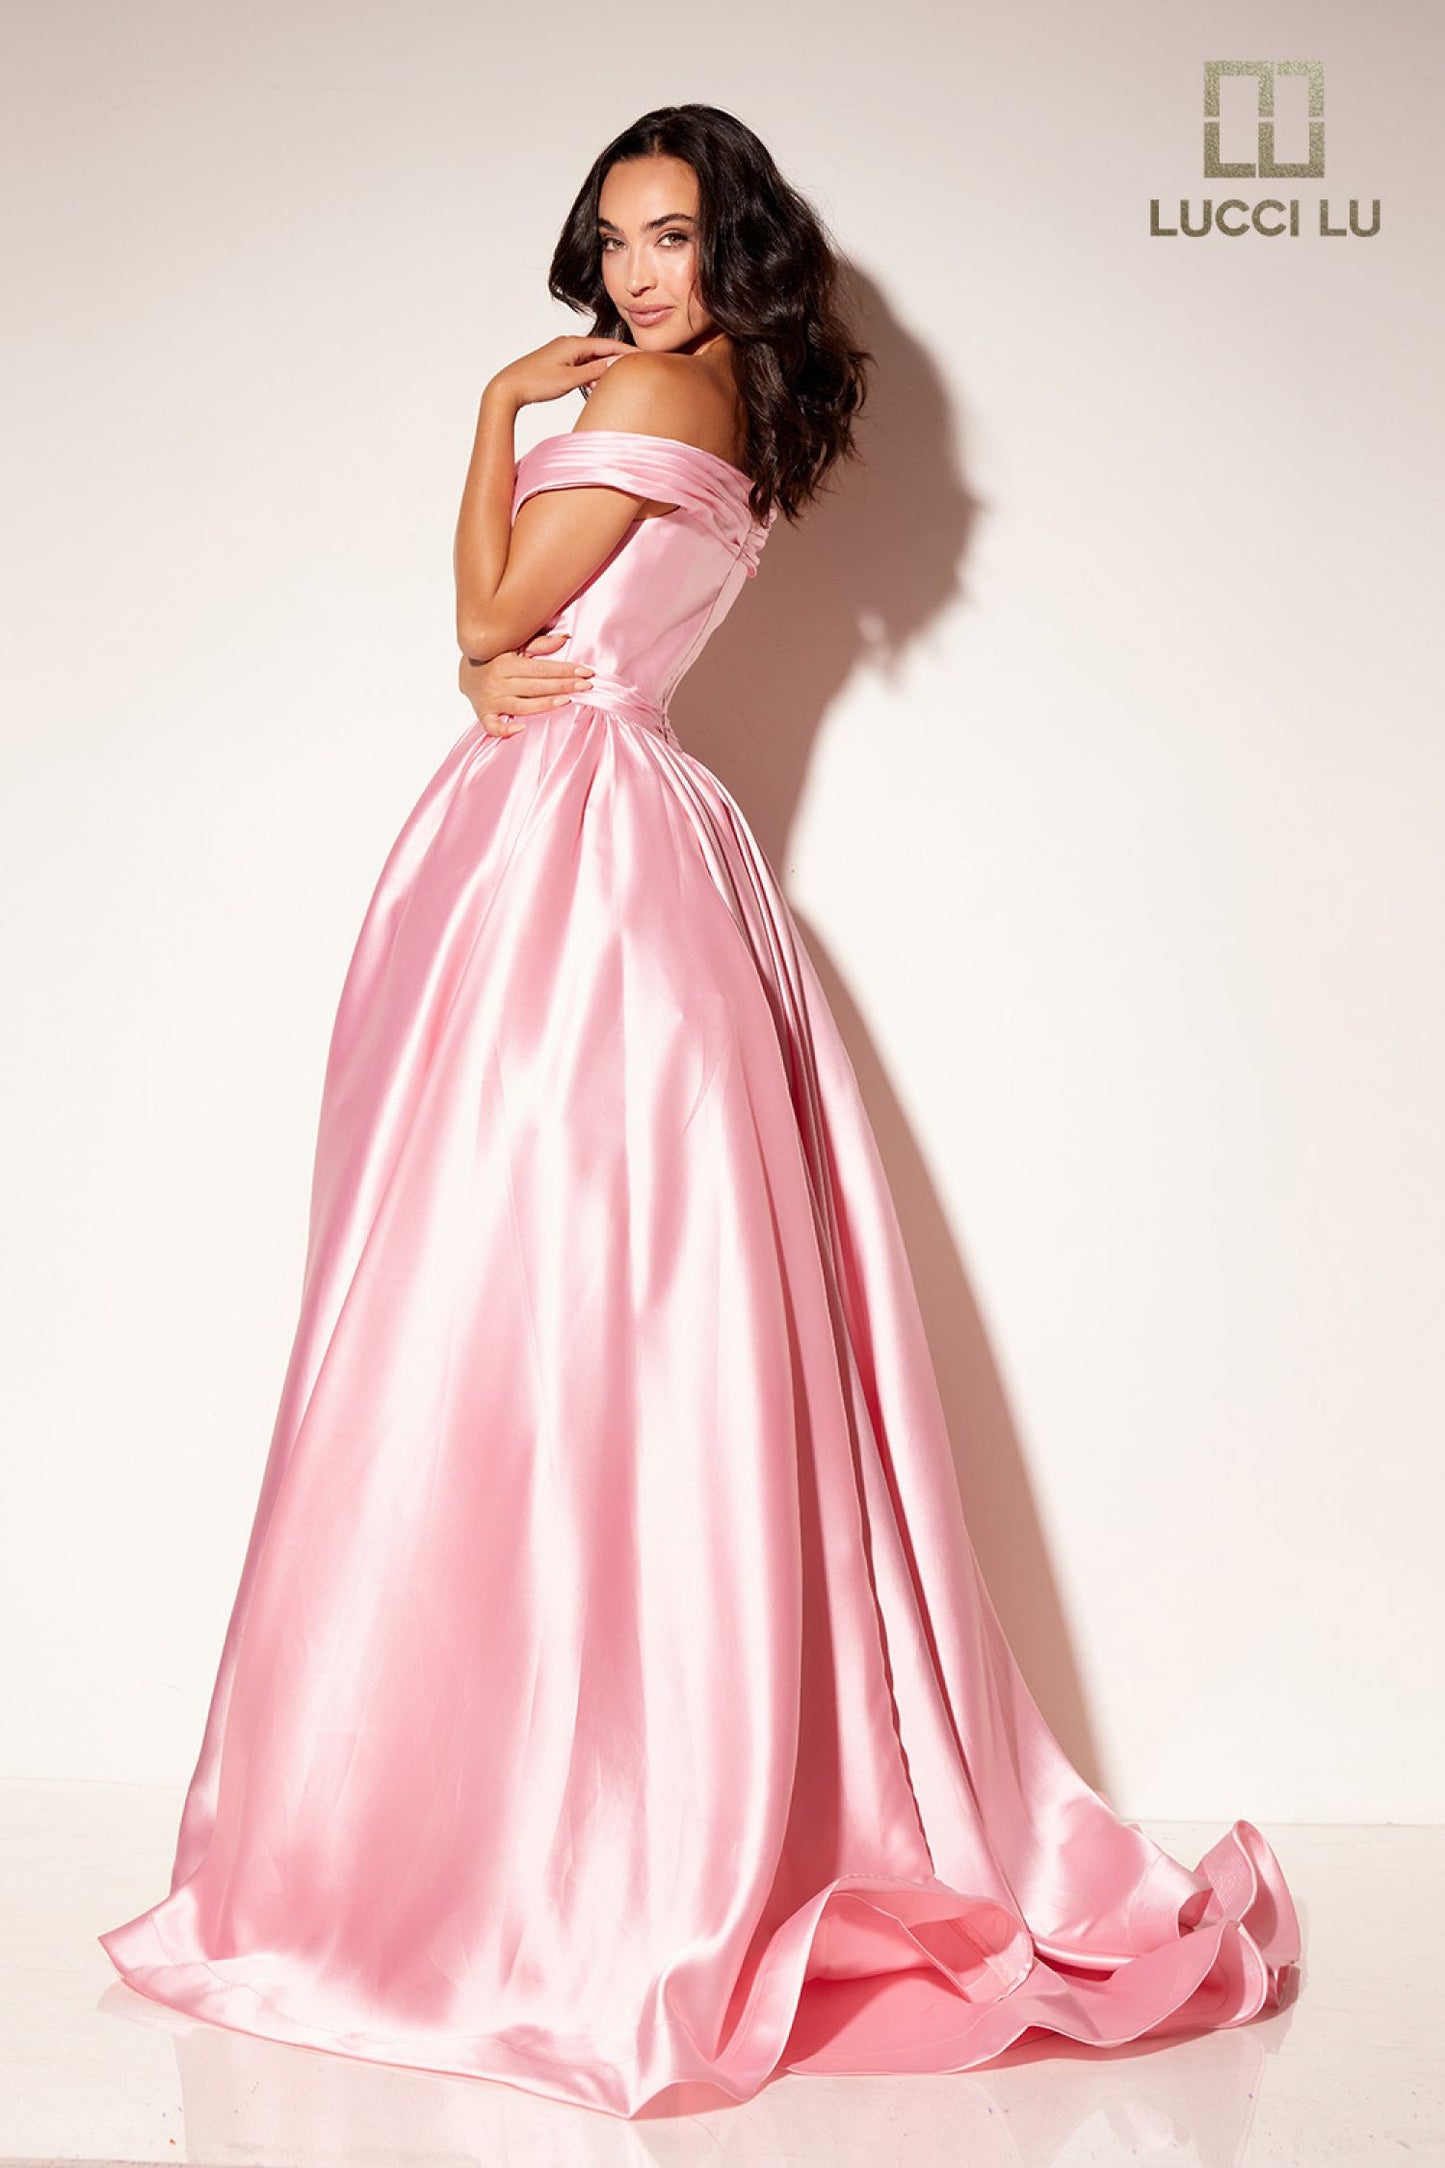 Be the belle of the ball in the Lucci Lu 1341 pink taffeta off the shoulder prom dress. The maxi length and slit offer sophisticated elegance, while the ruffle ballgown silhouette adds a touch of romance. Perfect for any evening event, this dress is sure to turn heads.